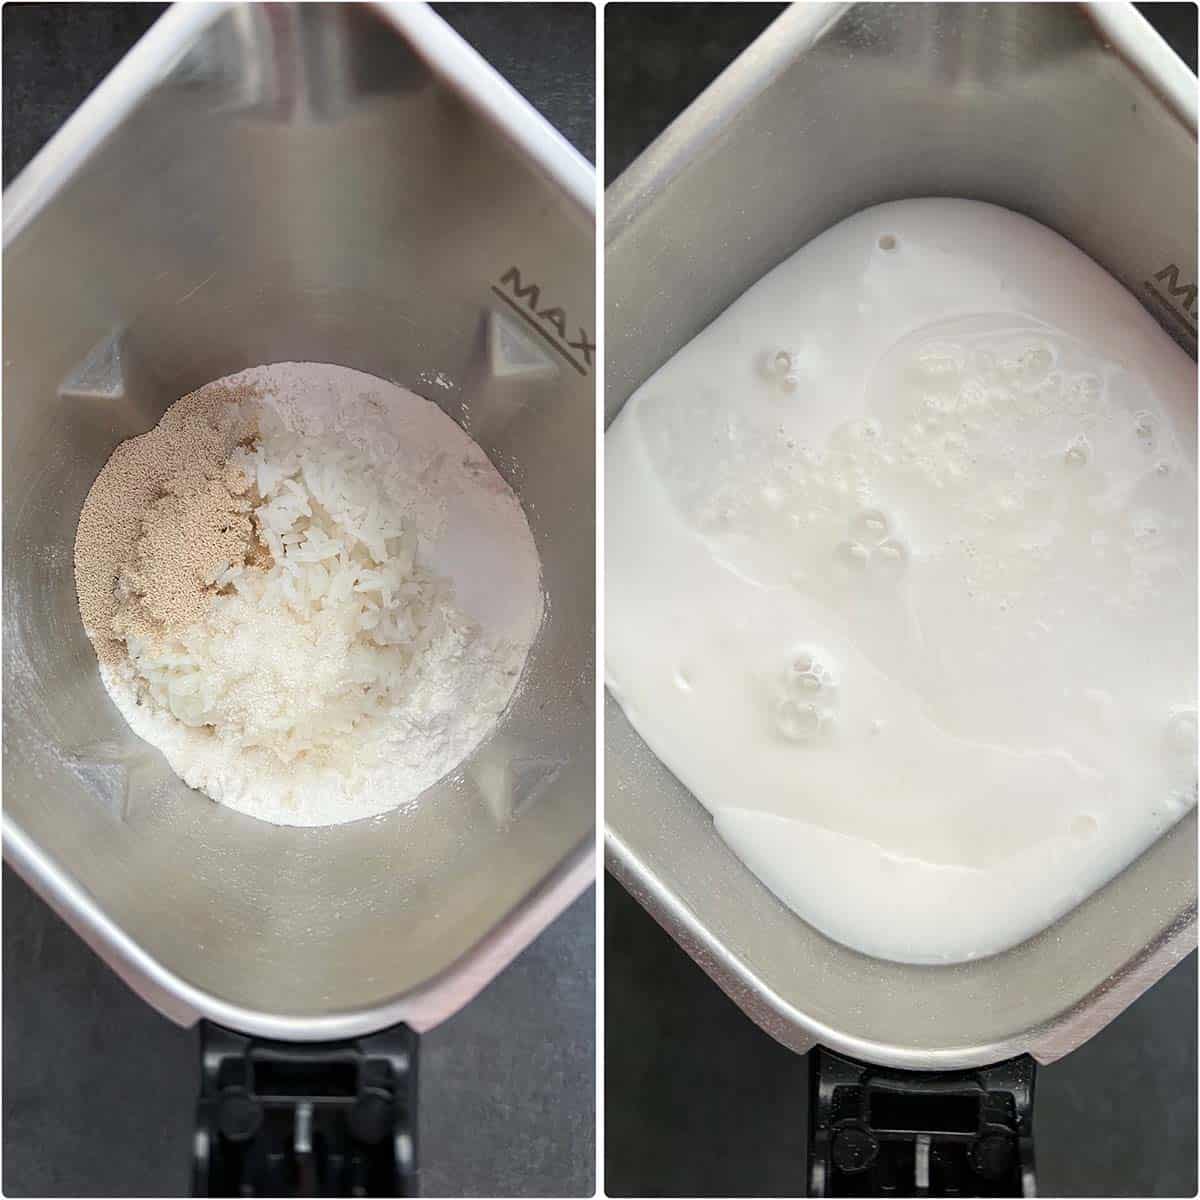 2 panel photo showing the before and after blending the ingredients.